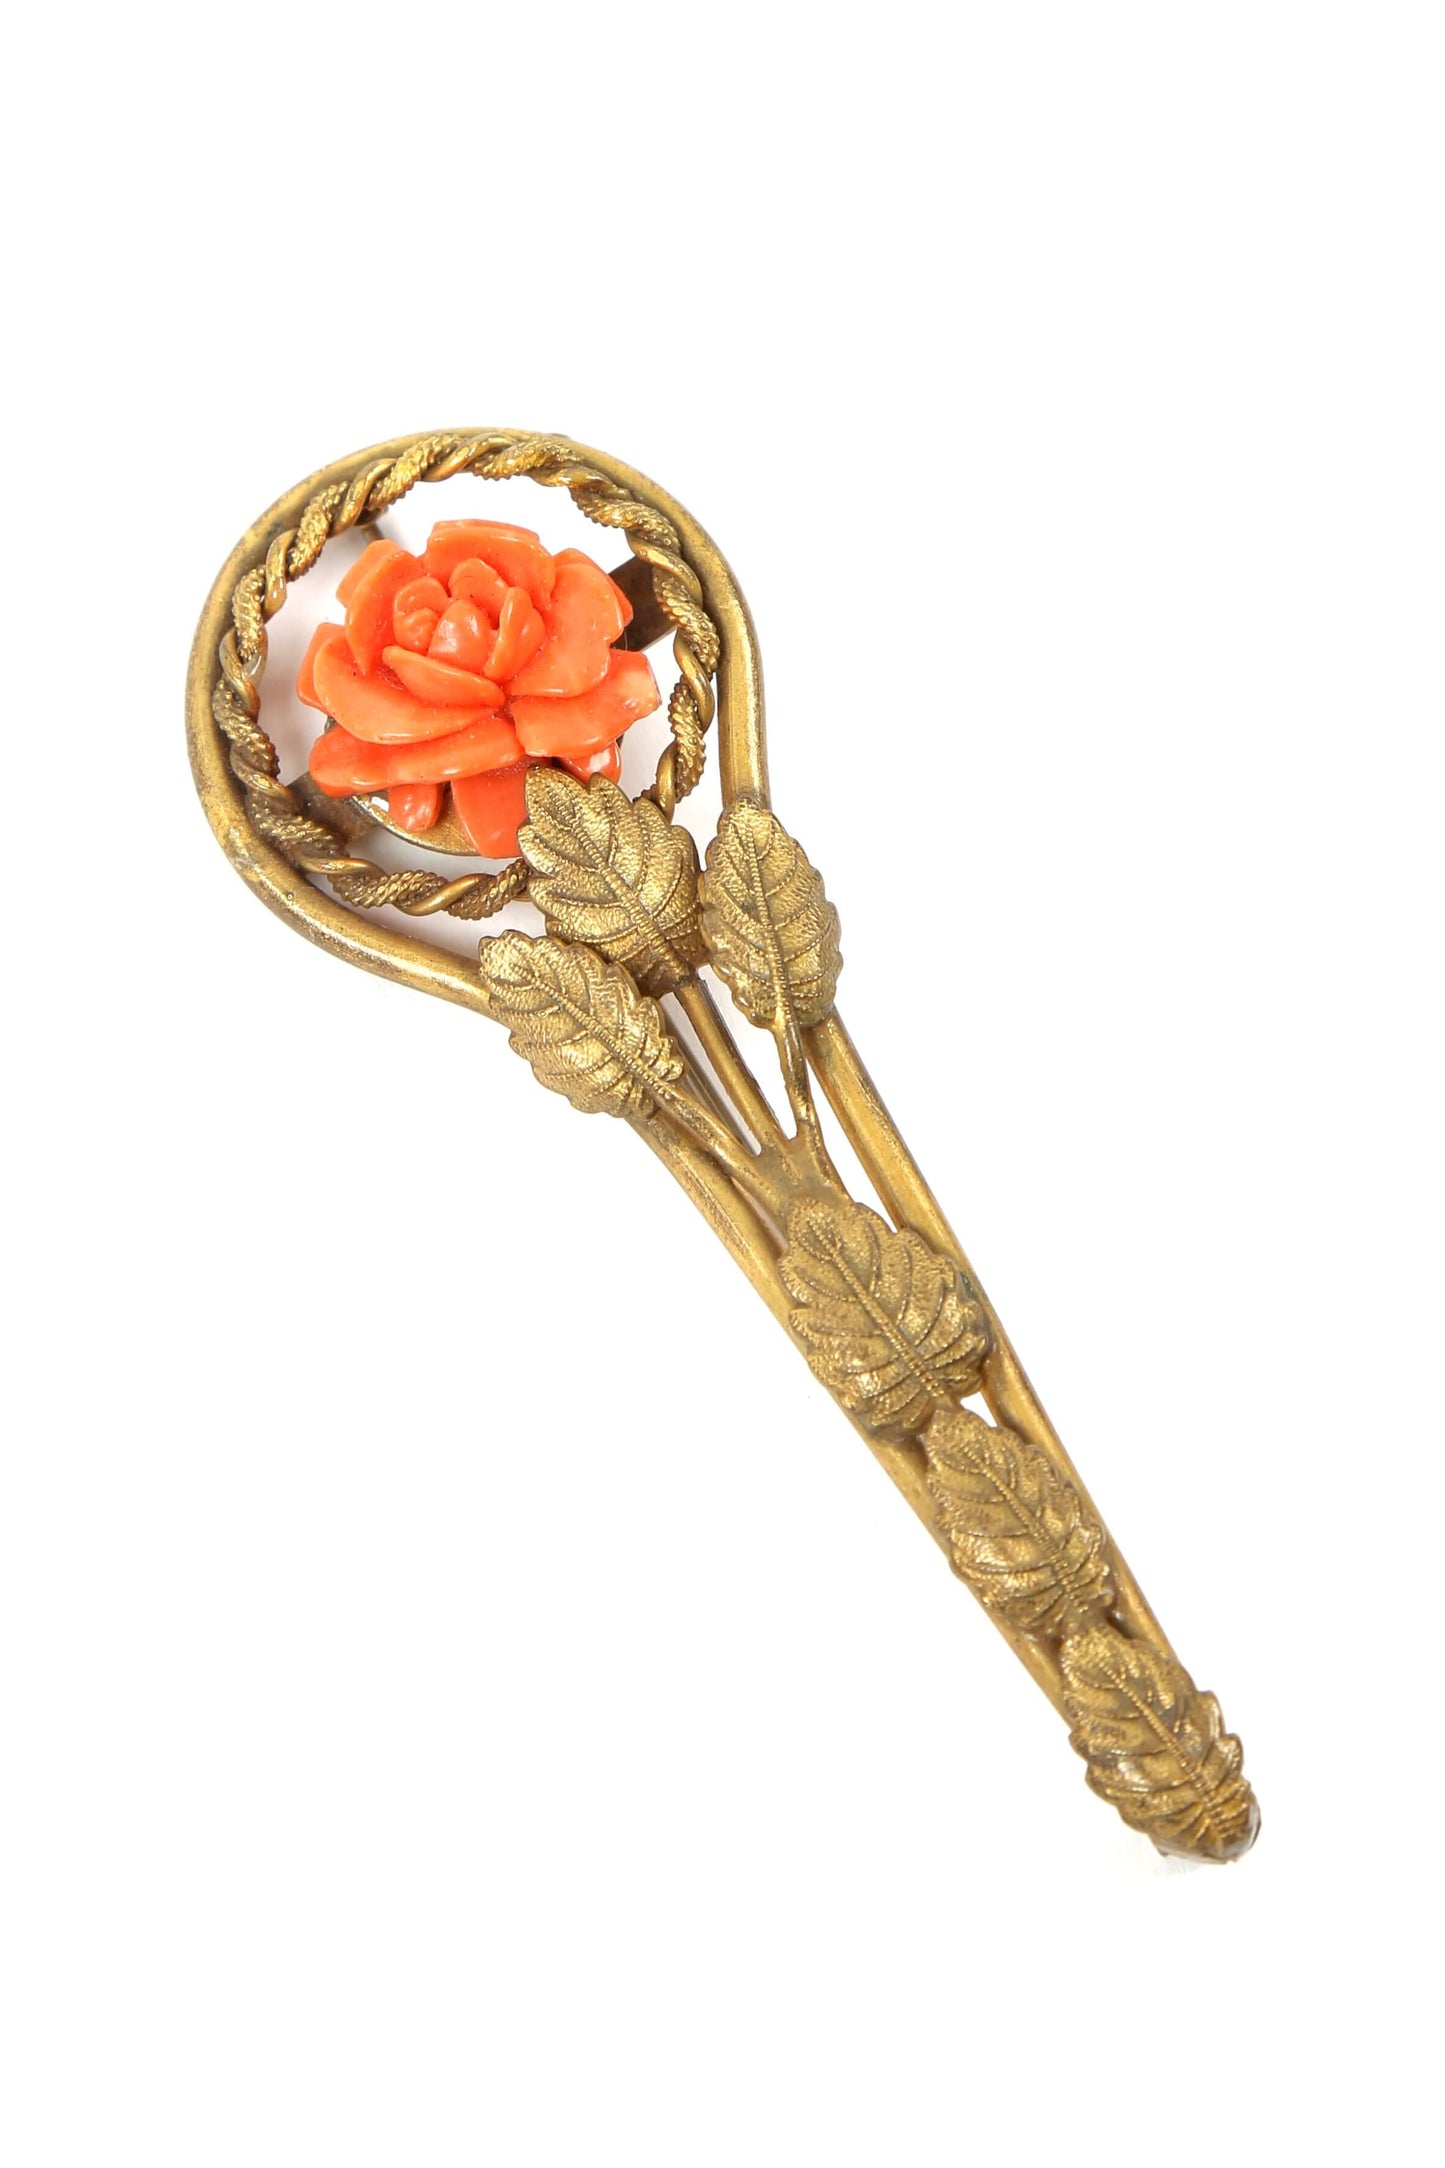 1930's Brass and Celluloid Rose Brooch